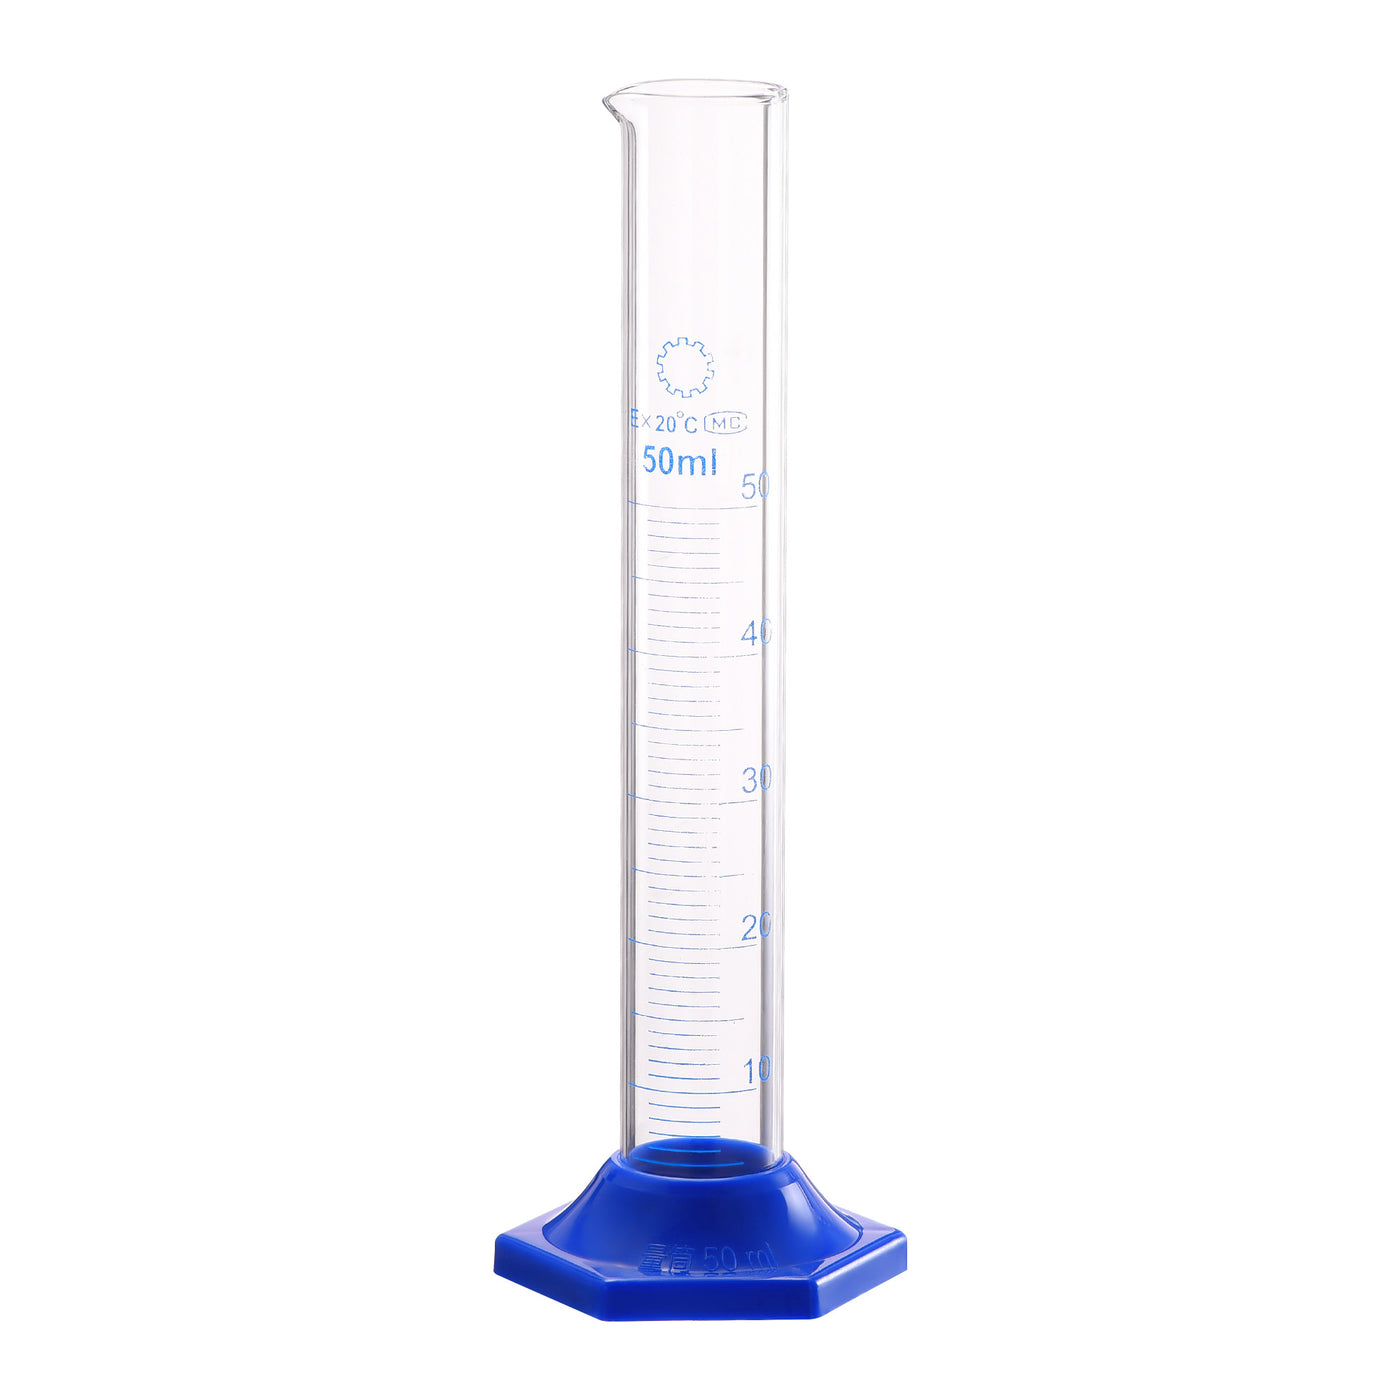 uxcell Uxcell Borosilicate Glass Graduated Cylinder, 50ml Measuring Cylinder, Blue Hex Base